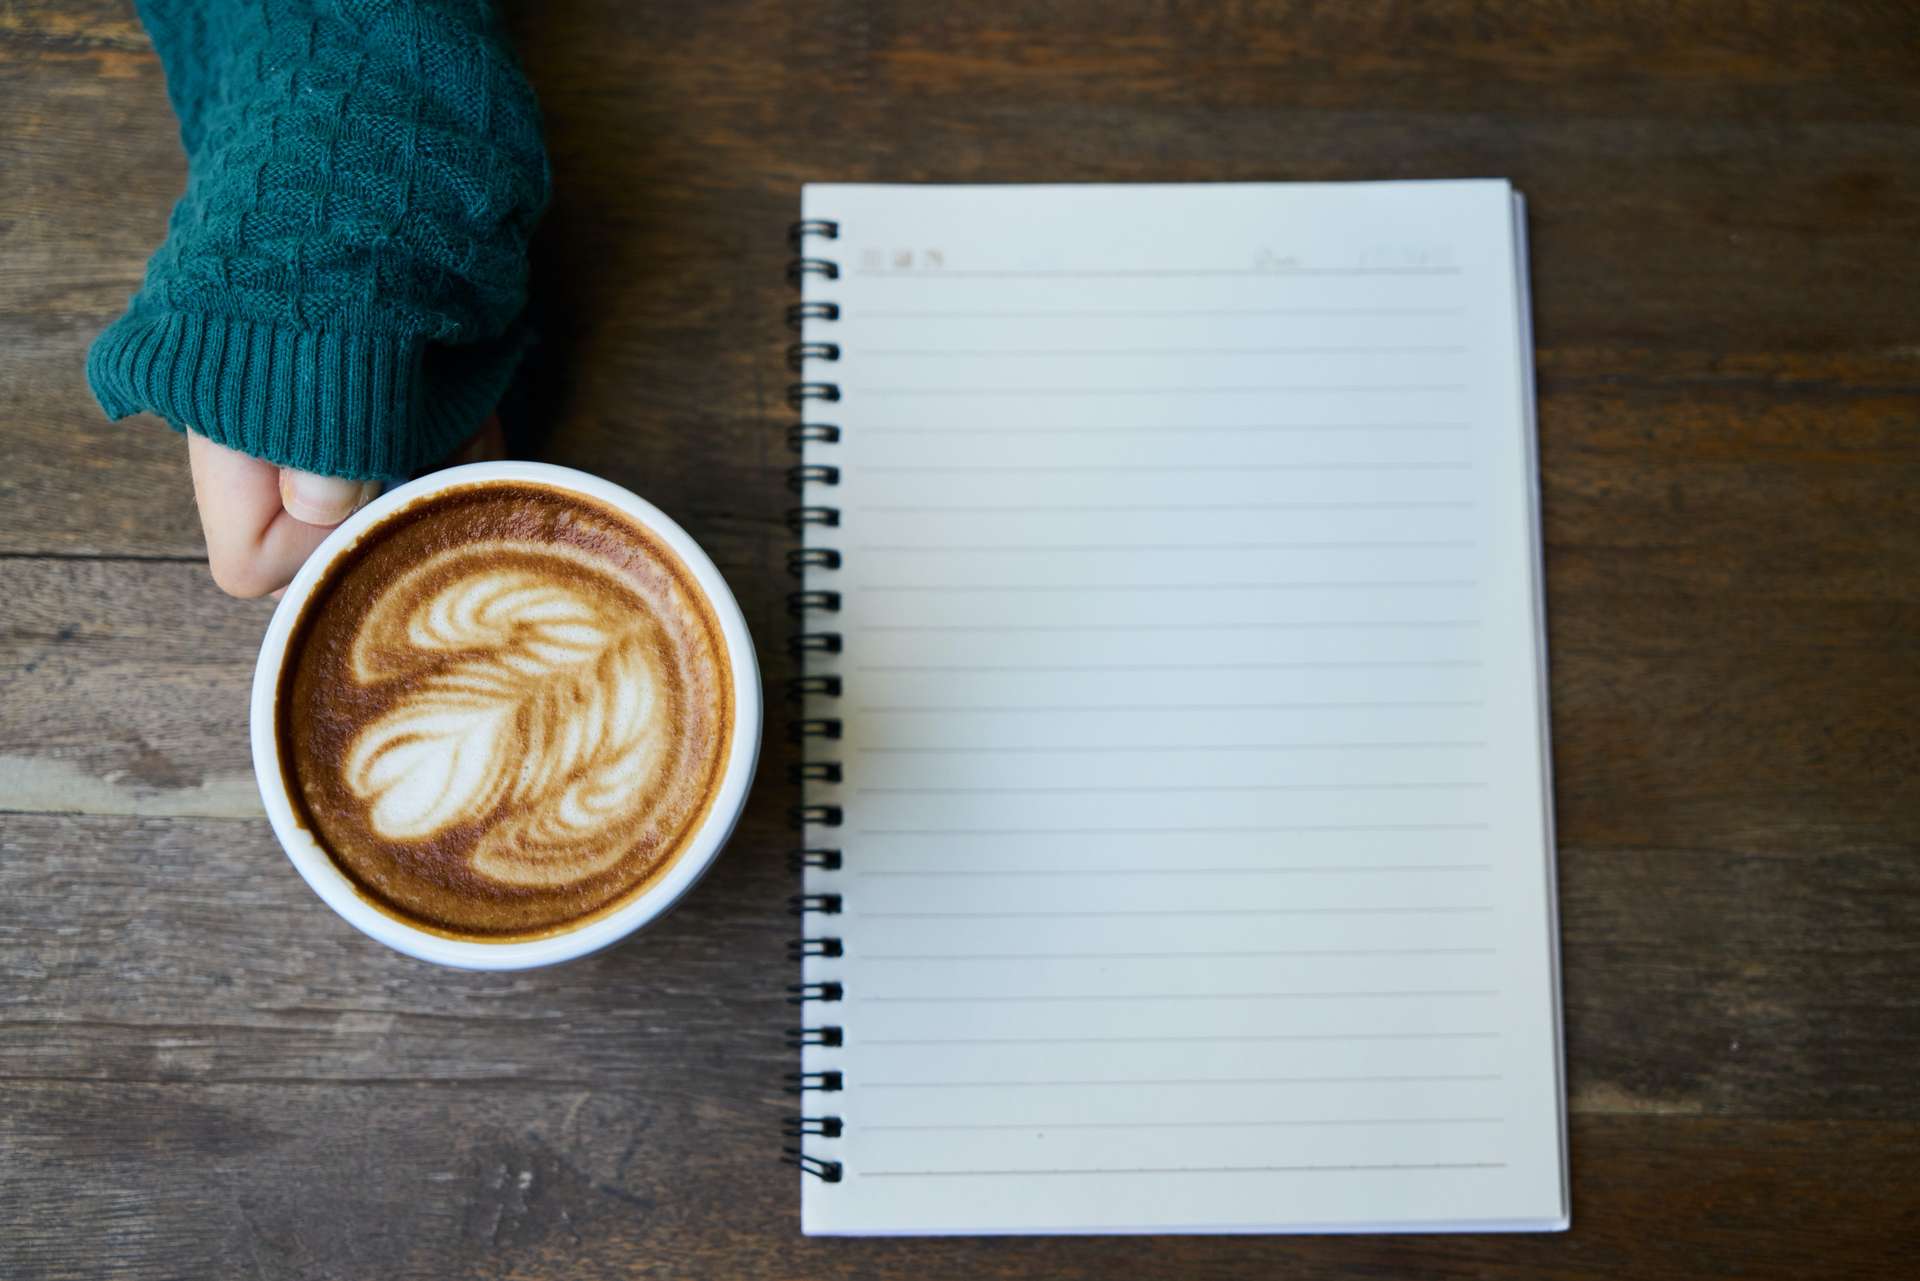 a cup of coffee next to a notebook, overhead view